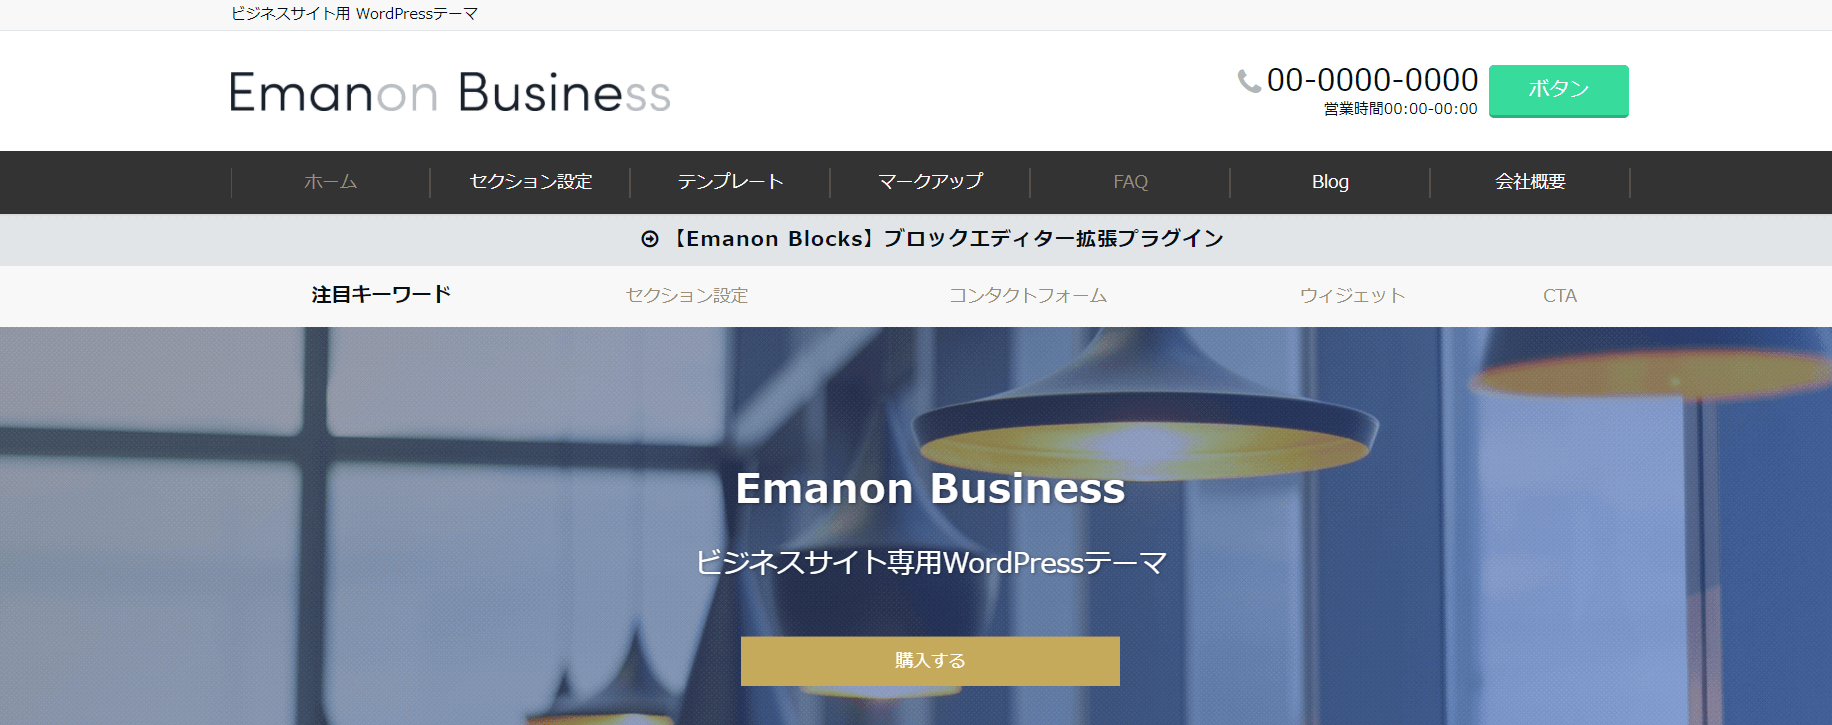 Emanon Bussiness